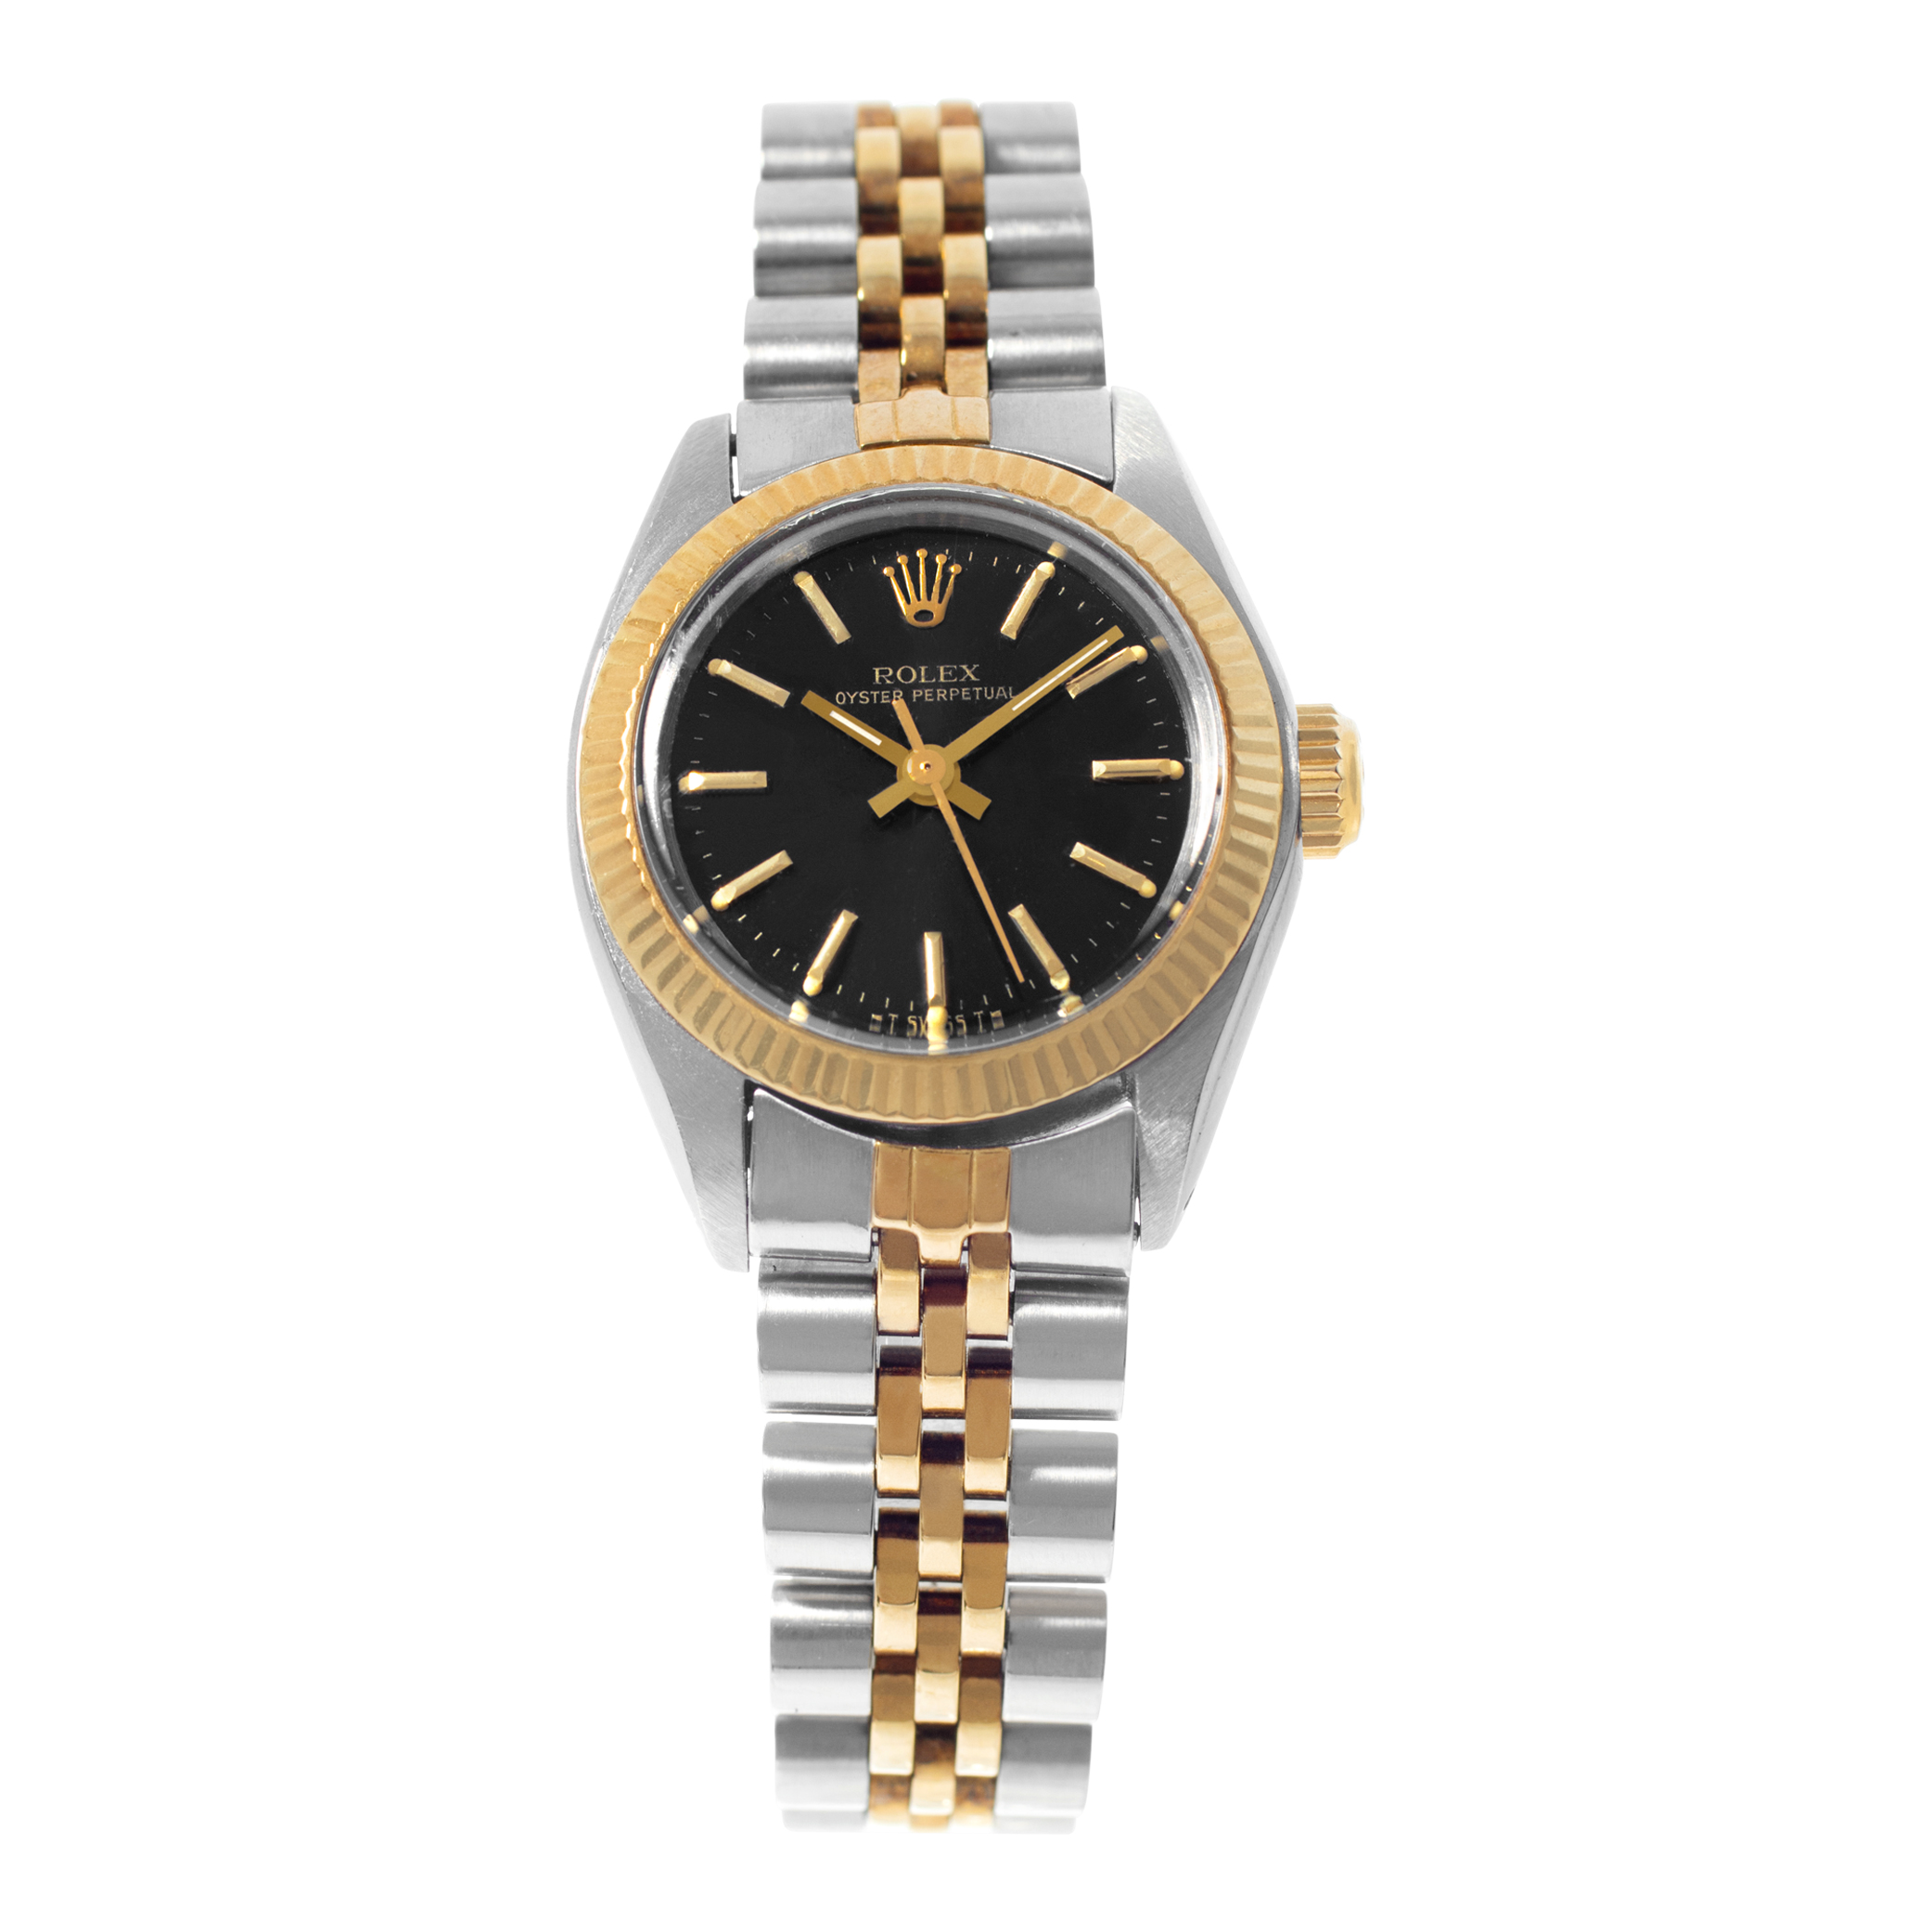 Rolex Oyster Perpetual 26mm 6719 image 1